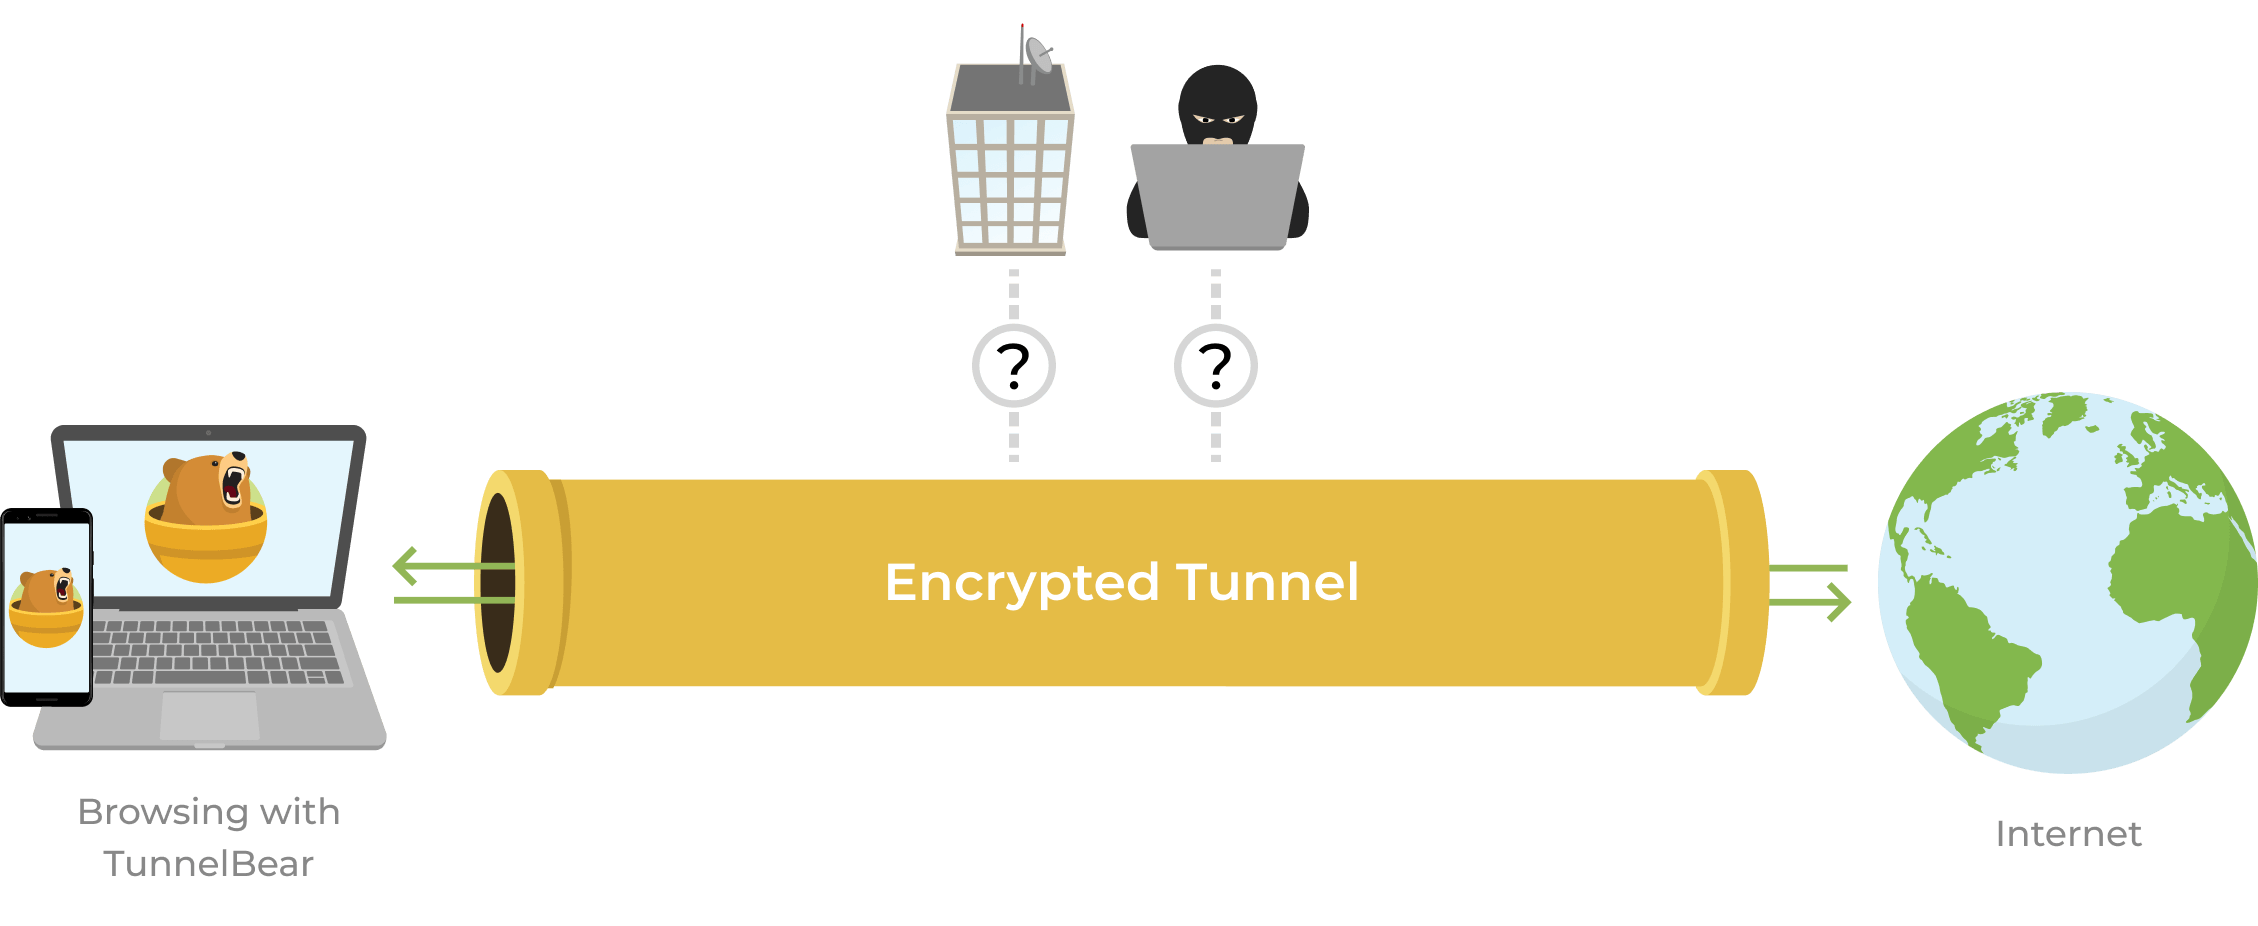 TunnelBear sends your browsing through an encrypted tunnel, keeping you safe from ISP and hackers